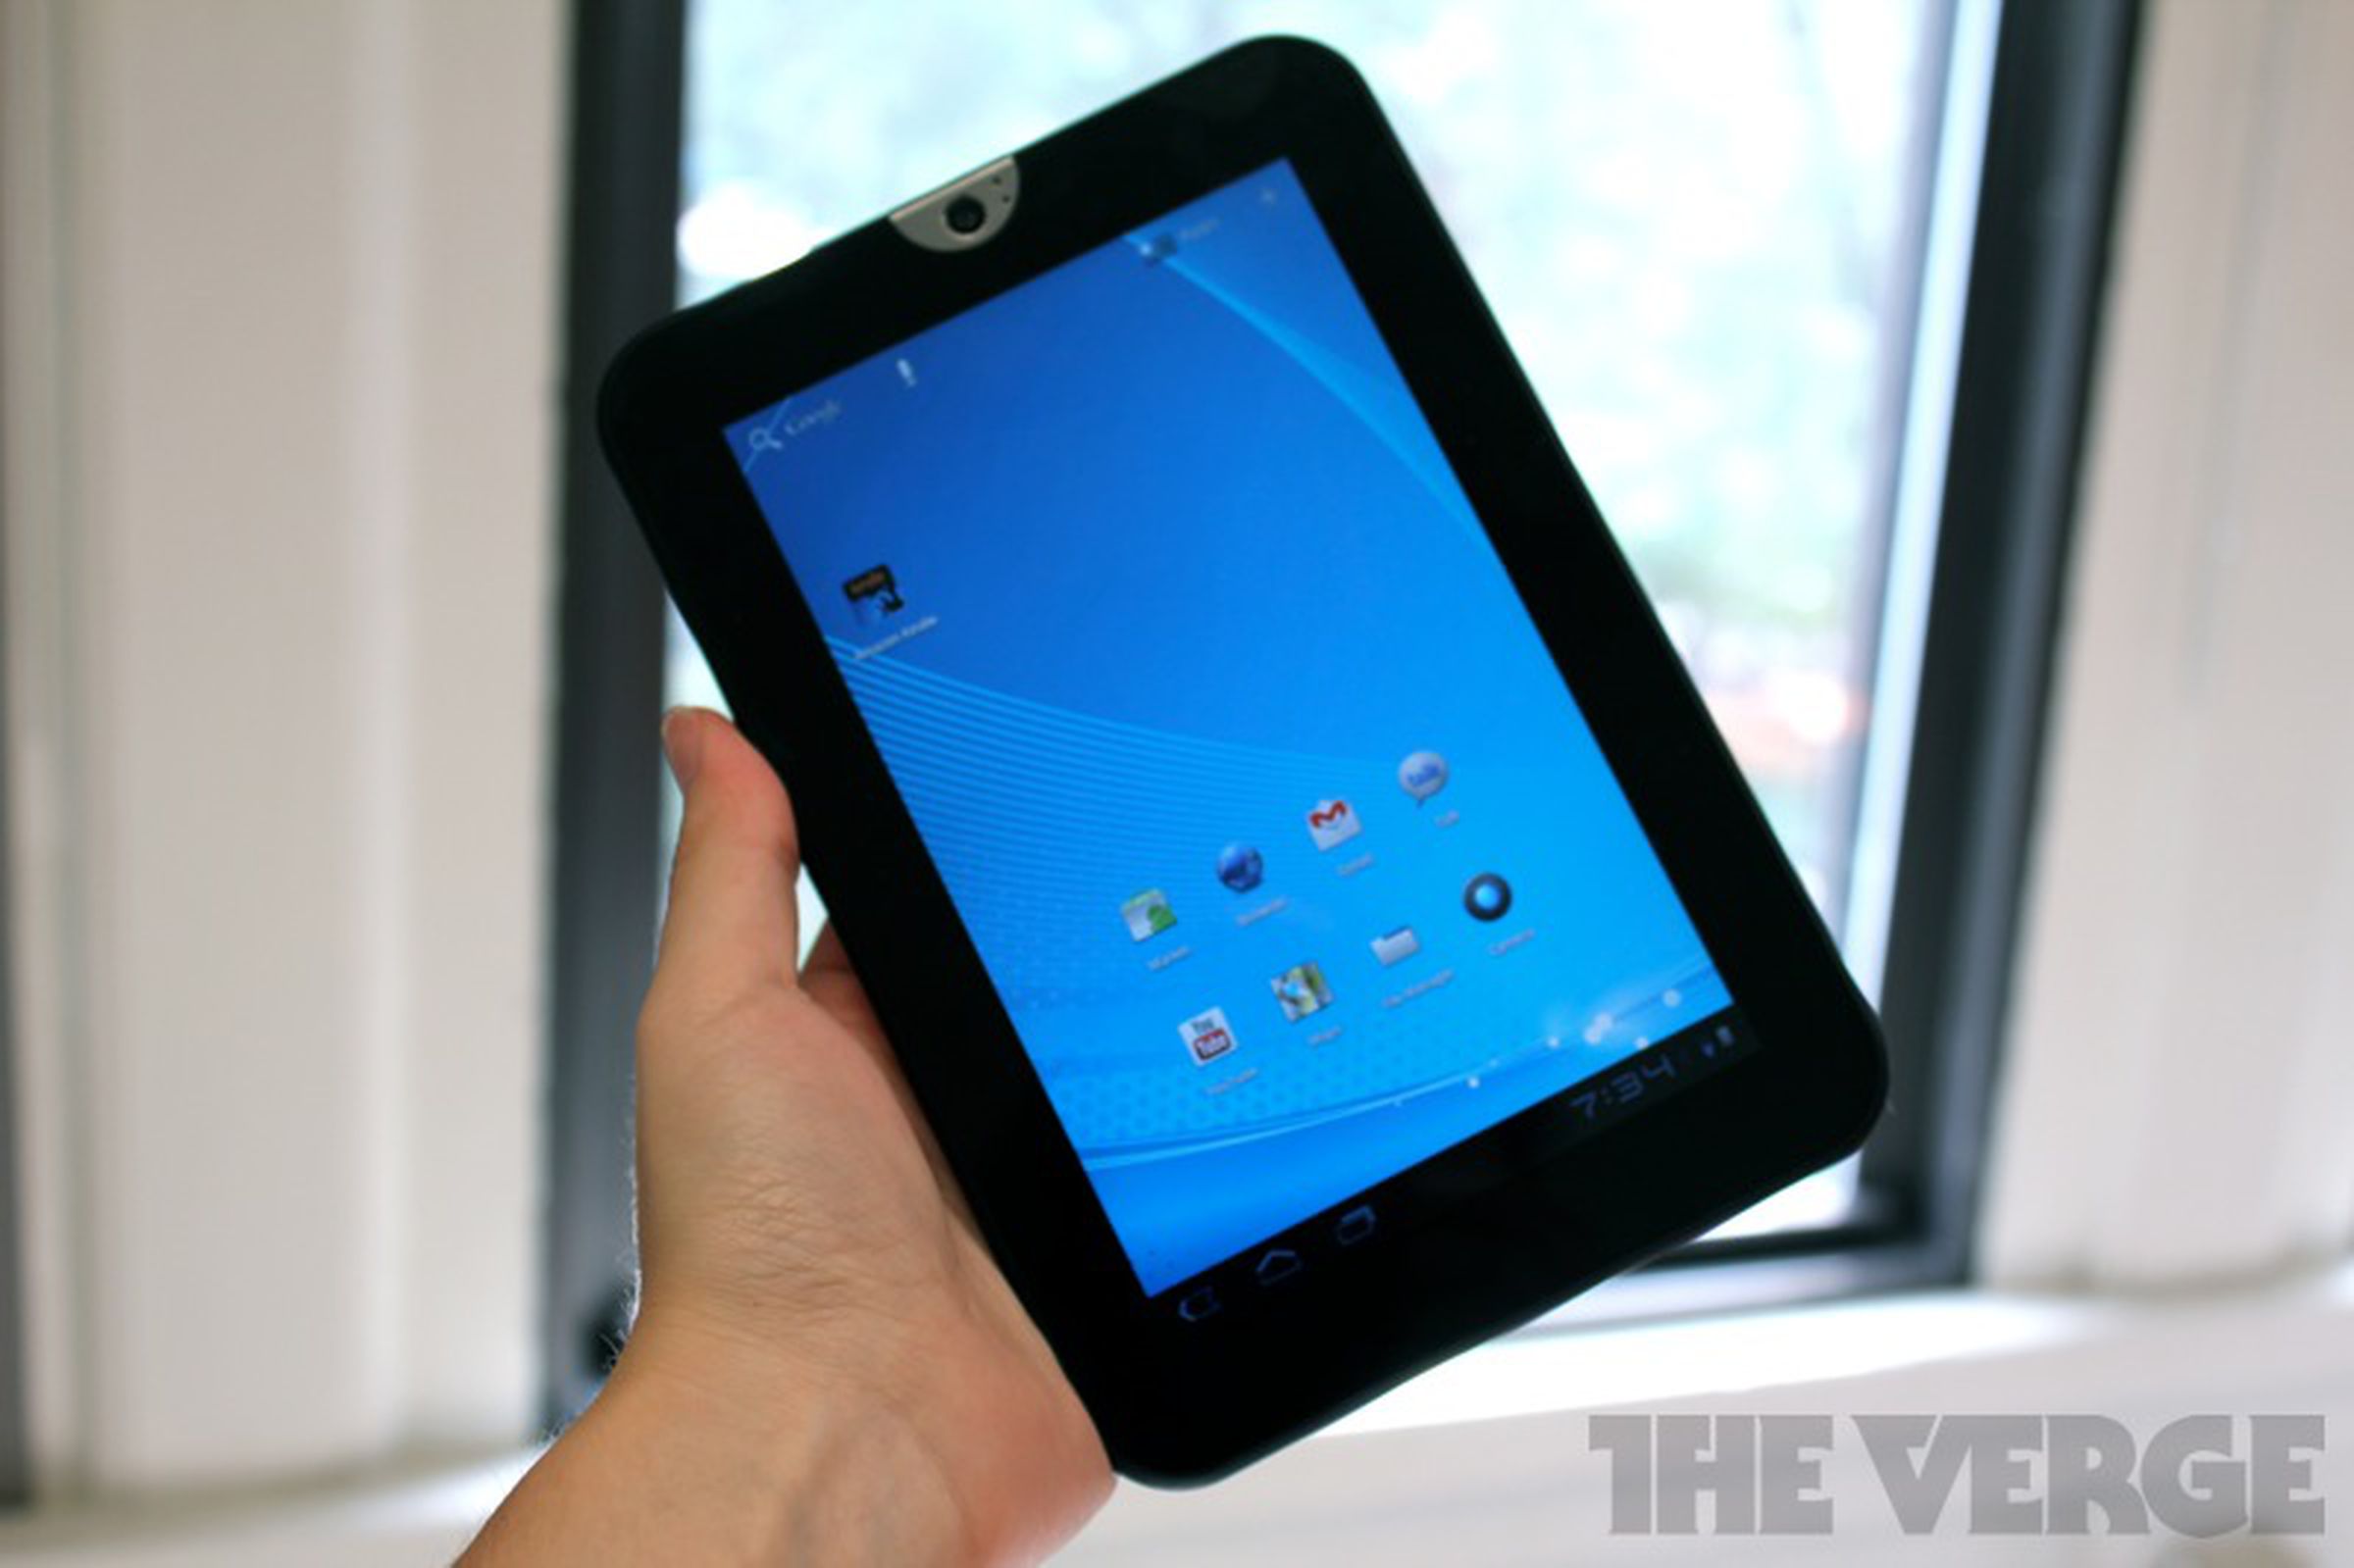 Toshiba Thrive 7-inch hands-on pictures